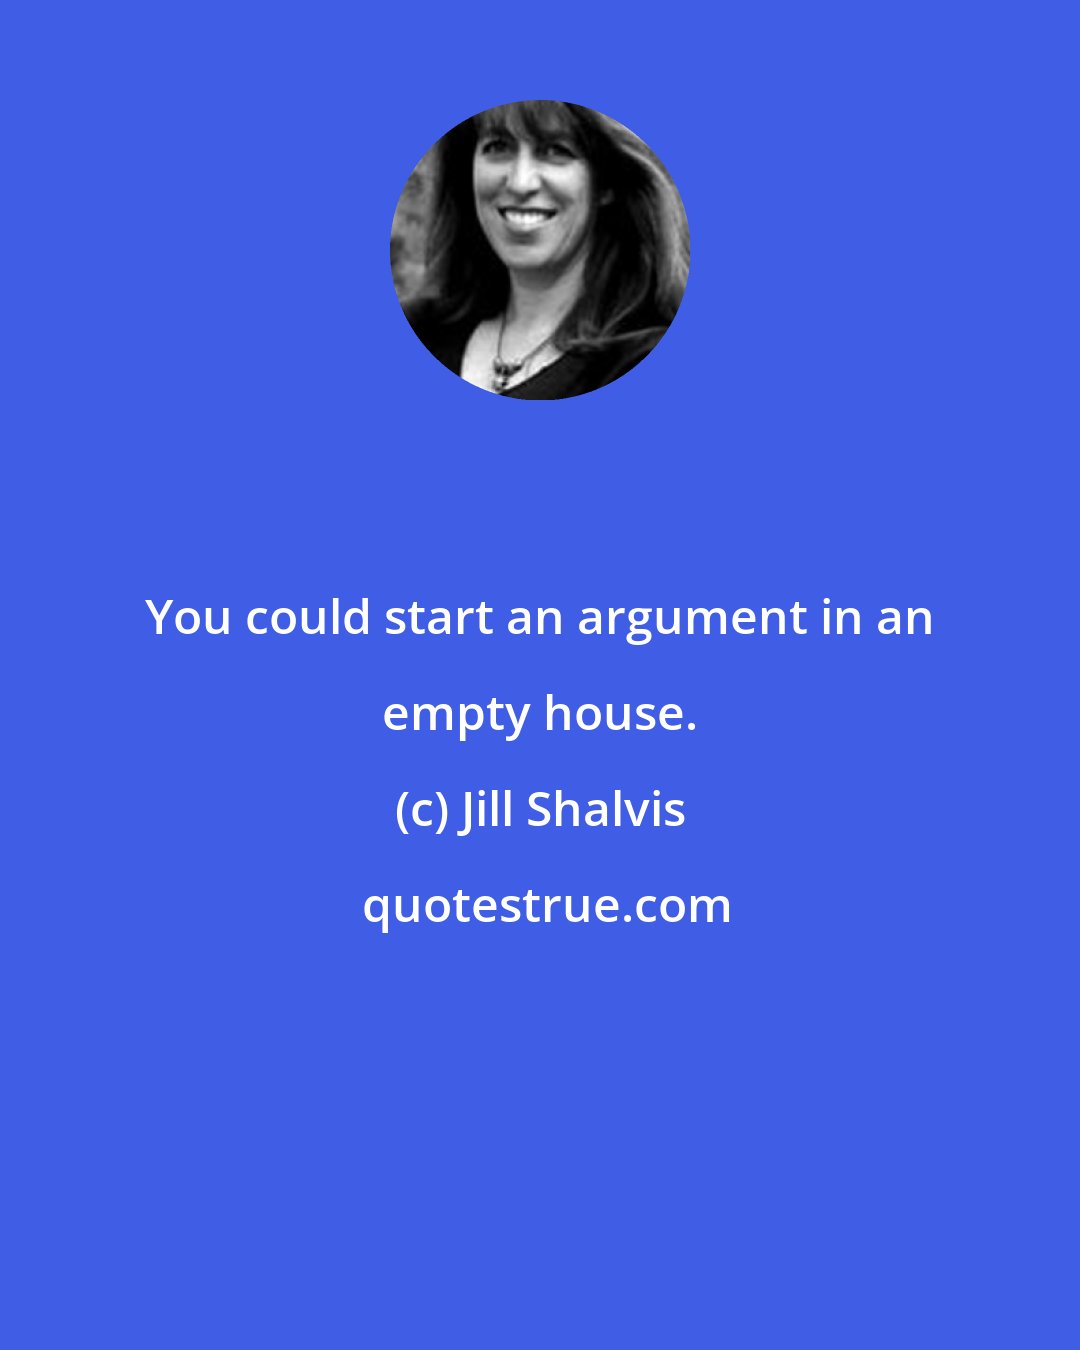 Jill Shalvis: You could start an argument in an empty house.